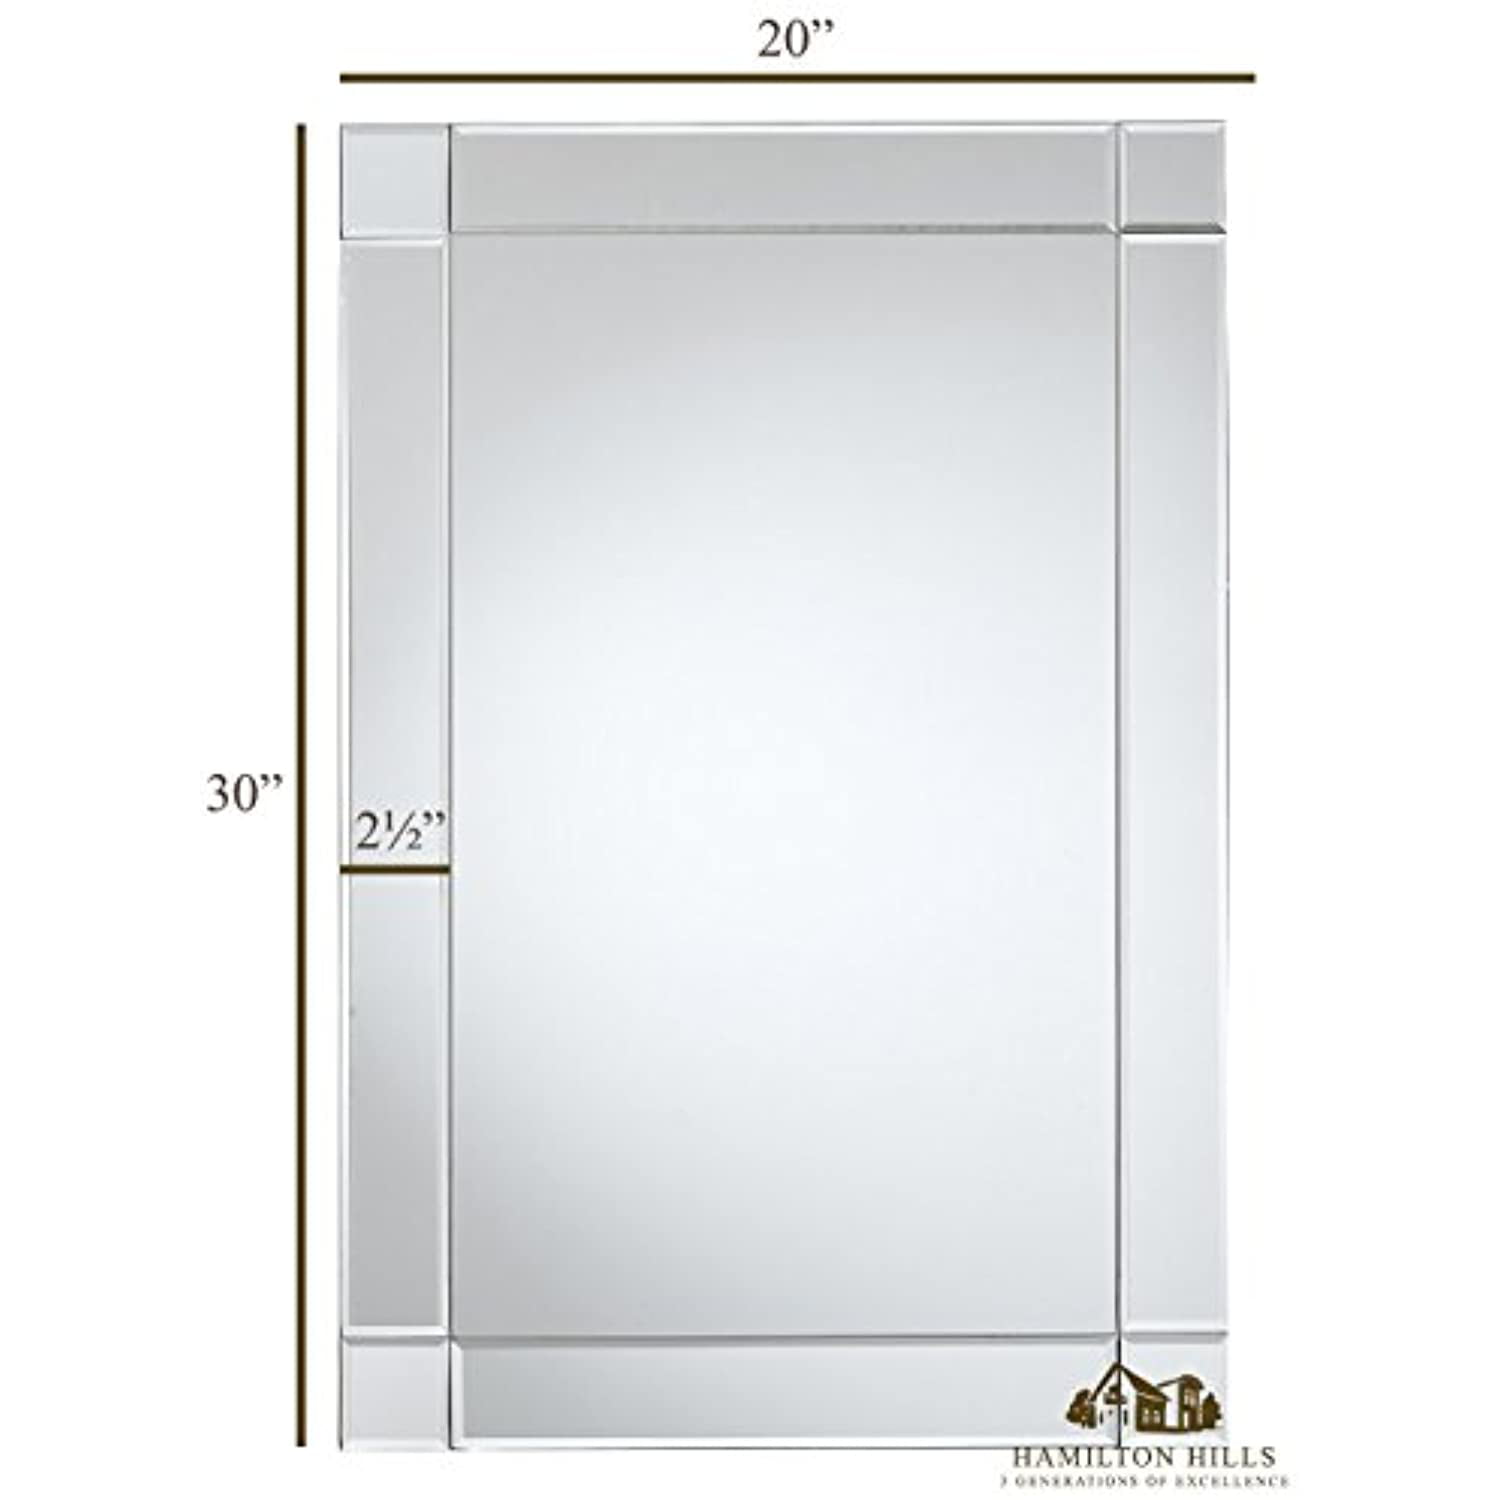 Hallway or Entry Modern & Classy Accent Decor for Vanity Hangs Horizontal 20x30 Wall Rectangular Mirror with Beveled Edge Hamilton Hills Large Silver Mirror with Squared Corner Frame Bathroom